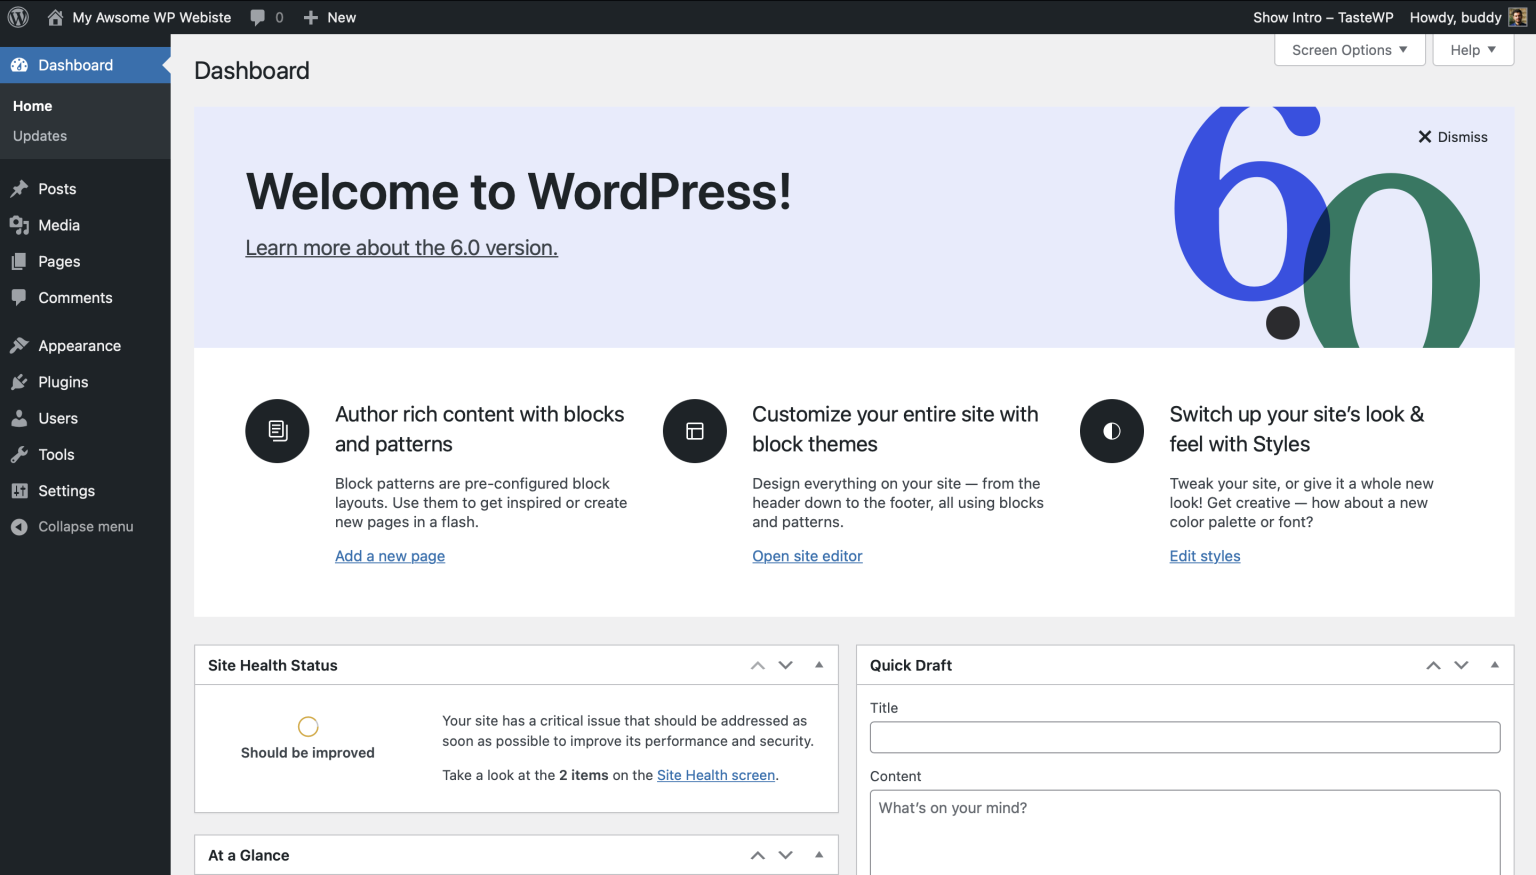 What Is WordPress? A guide for a beginner.